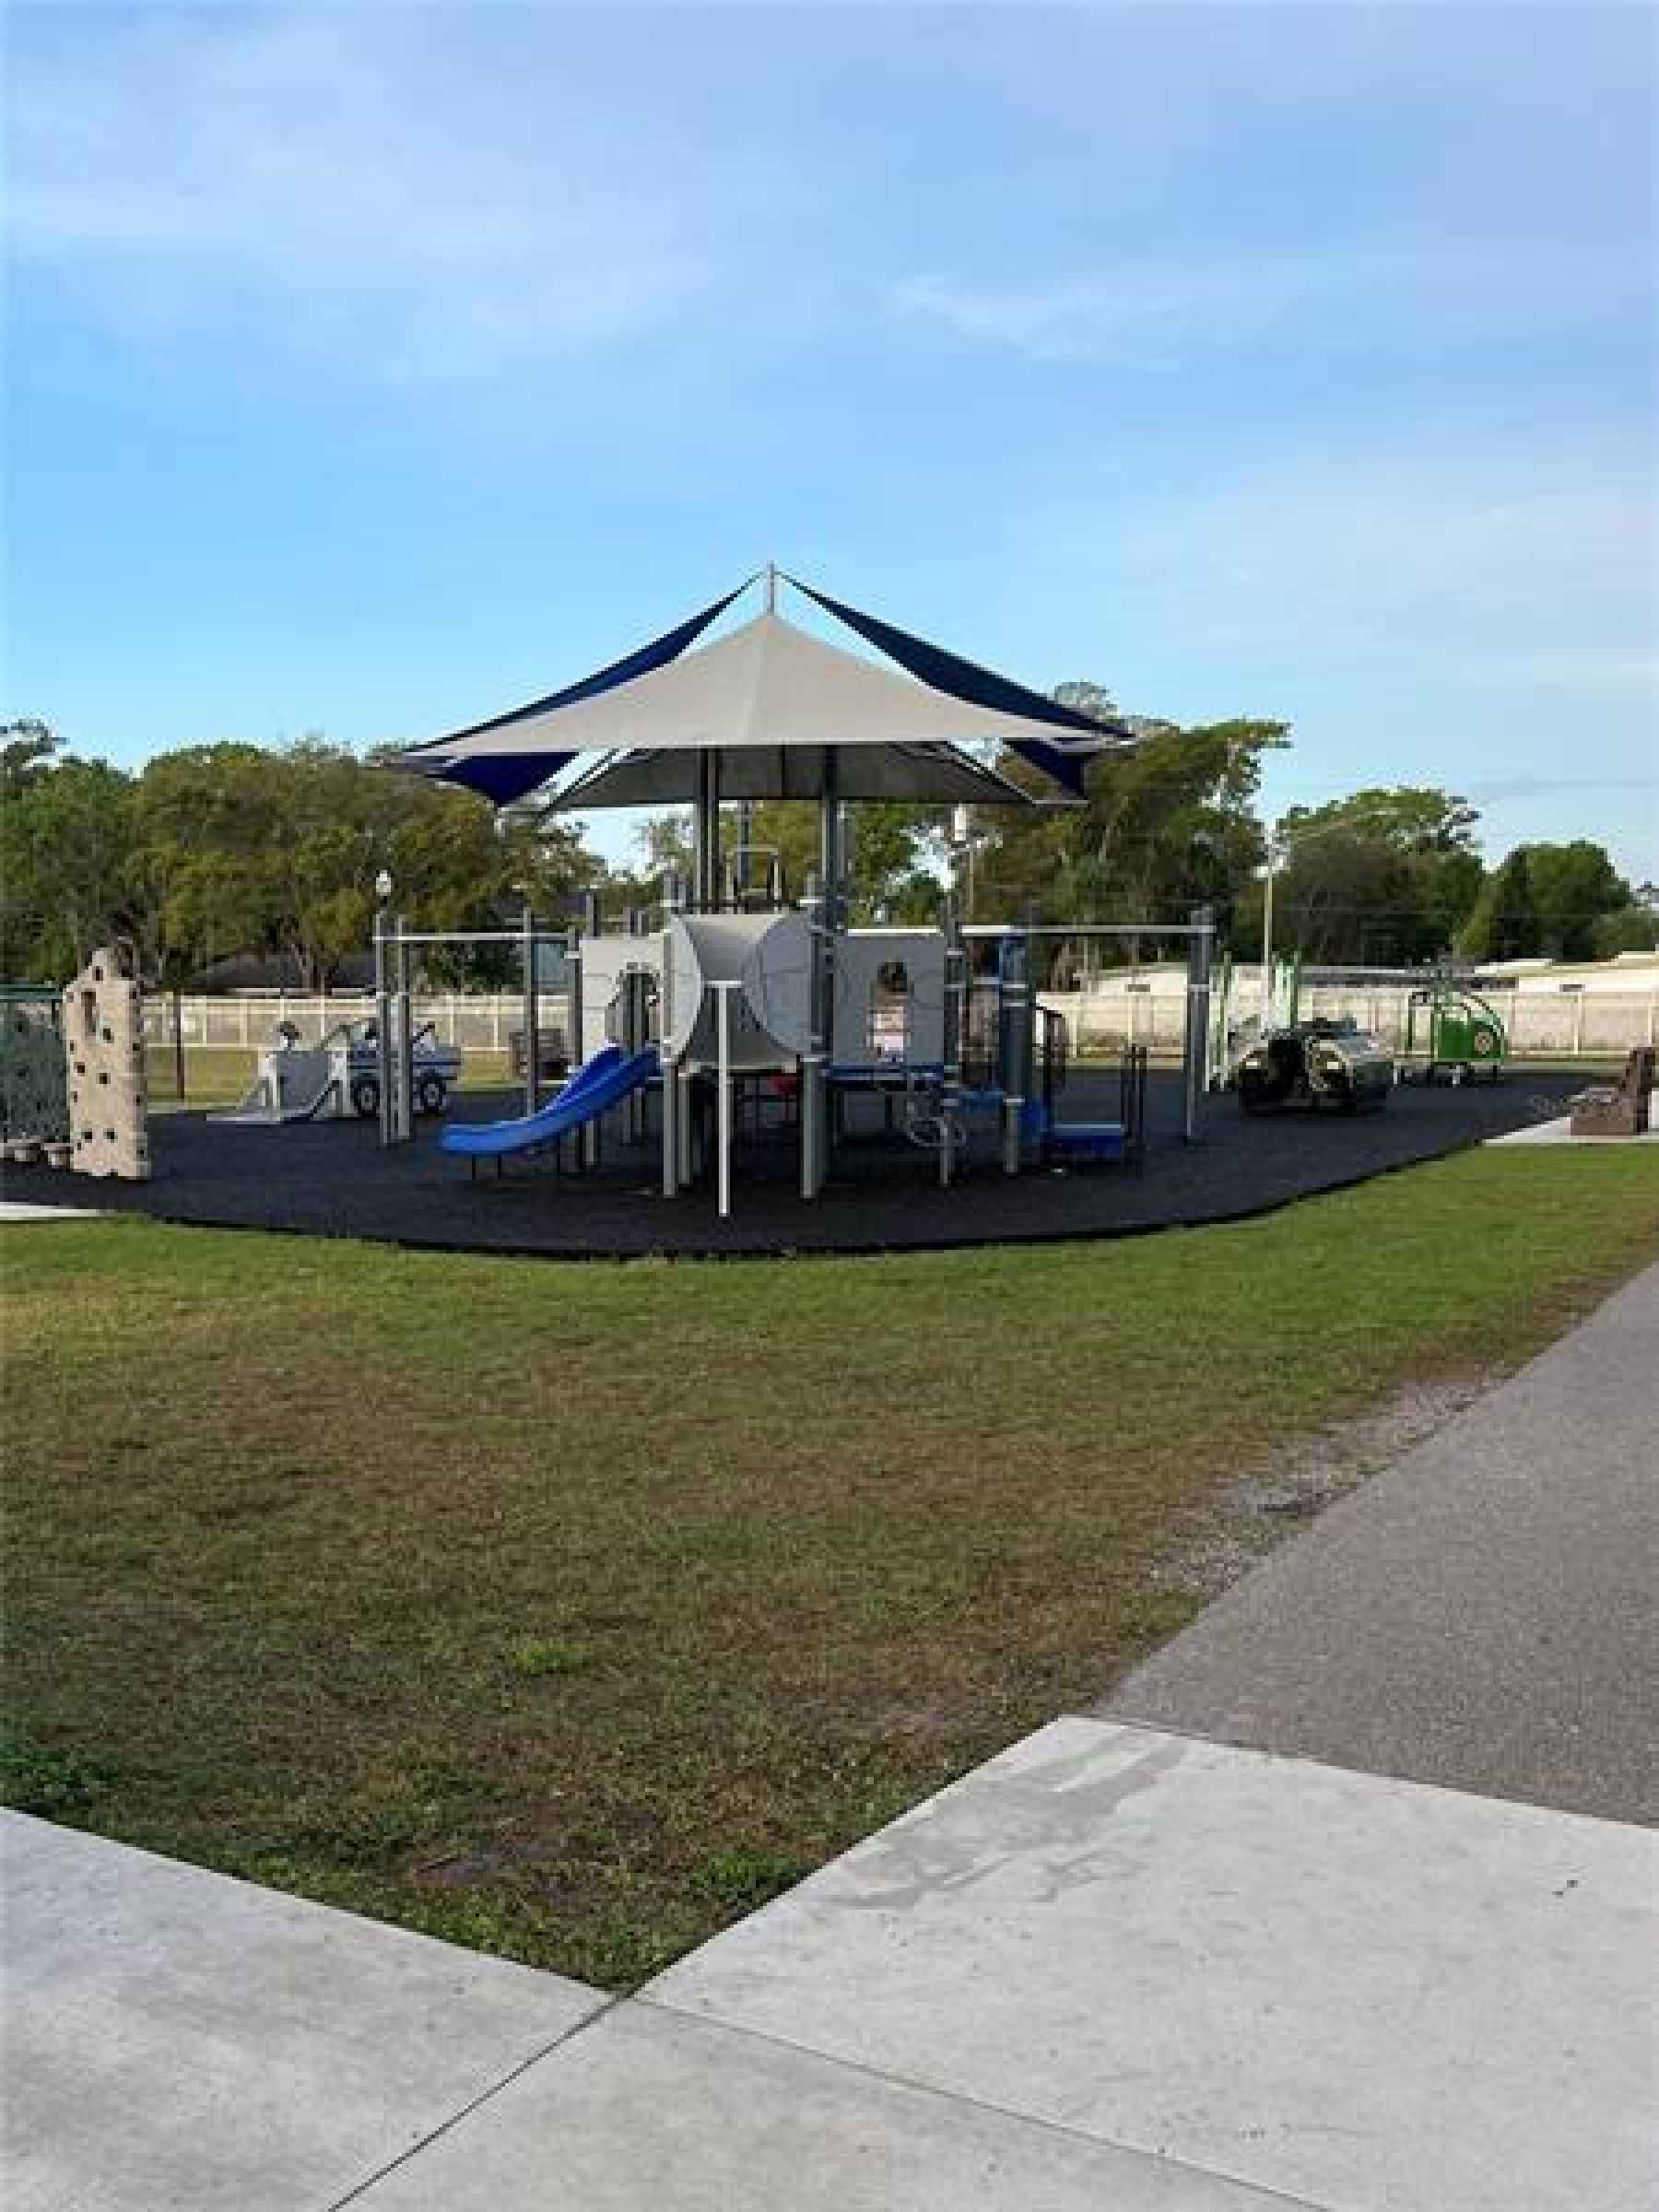 Playground for the kids